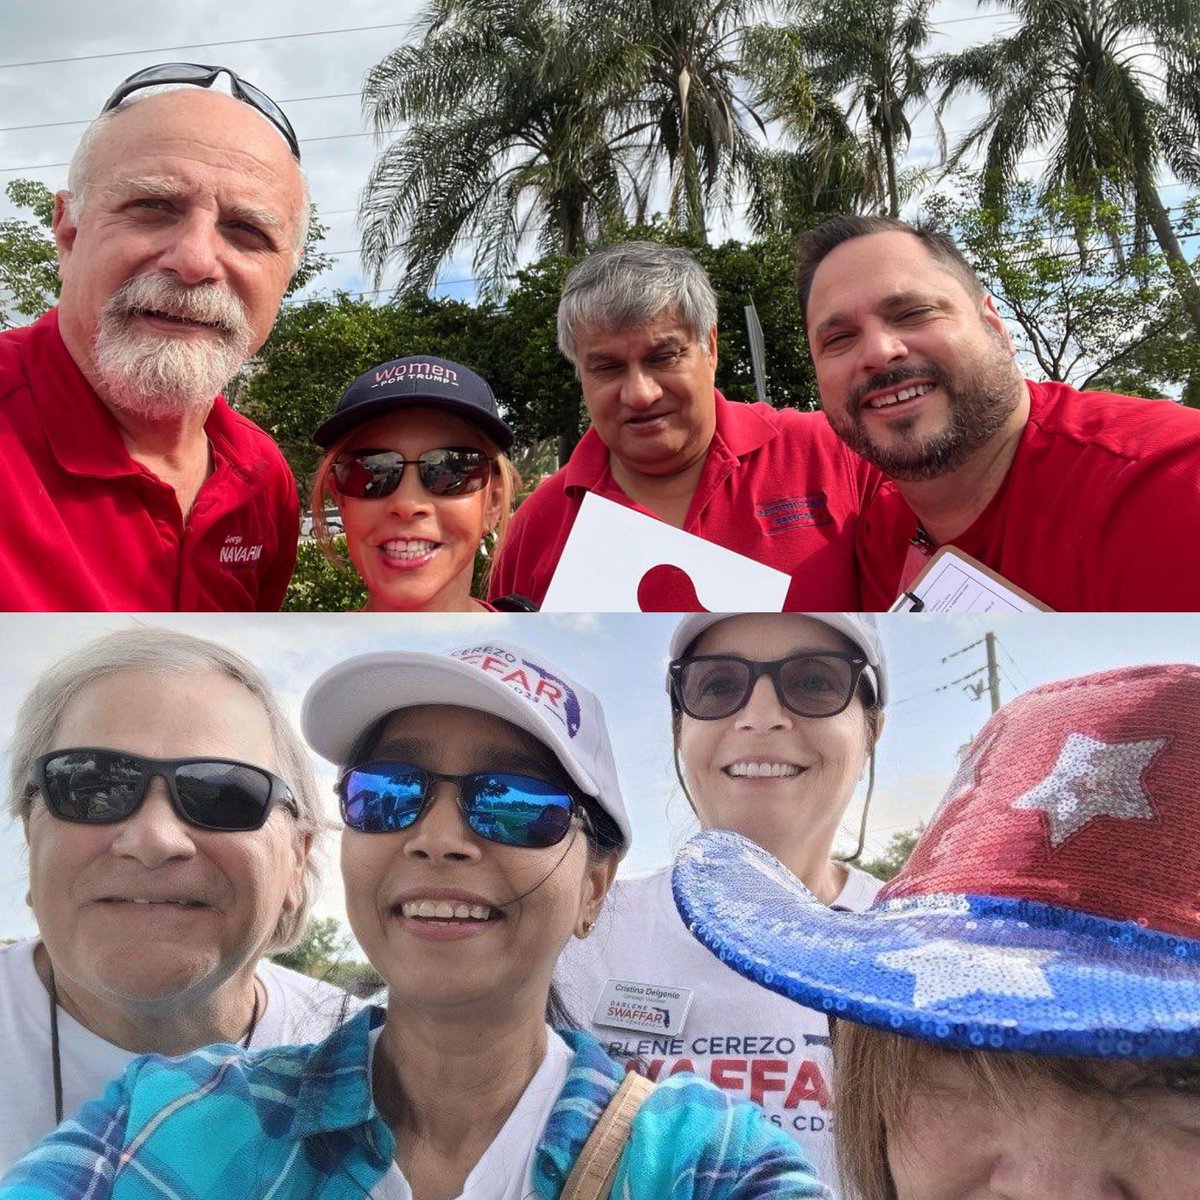 Our great volunteers went out across #Broward yesterday, reminding voters to renew their mail-in ballot requests, and making sure they plan on voting in the August Primaries and the General Election in November! 🇺🇸 #BrowardGOP #BrowardRepublicans #RepublicanParty #GOP #VoteRed